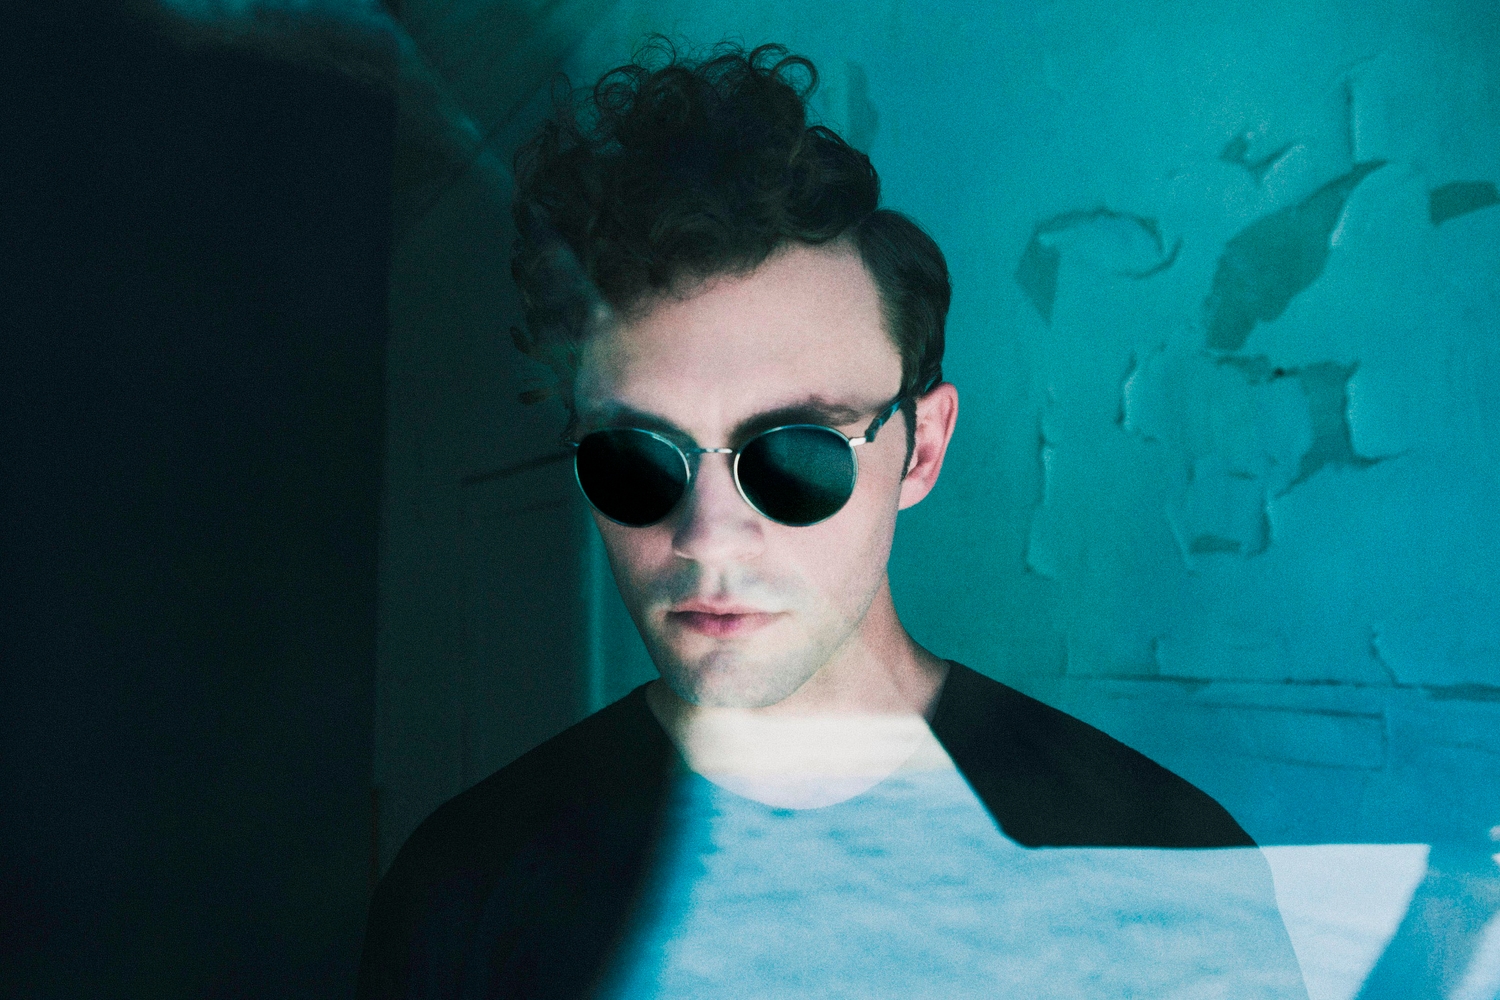 Mikky Ekko’s debut album to be released in the UK this September